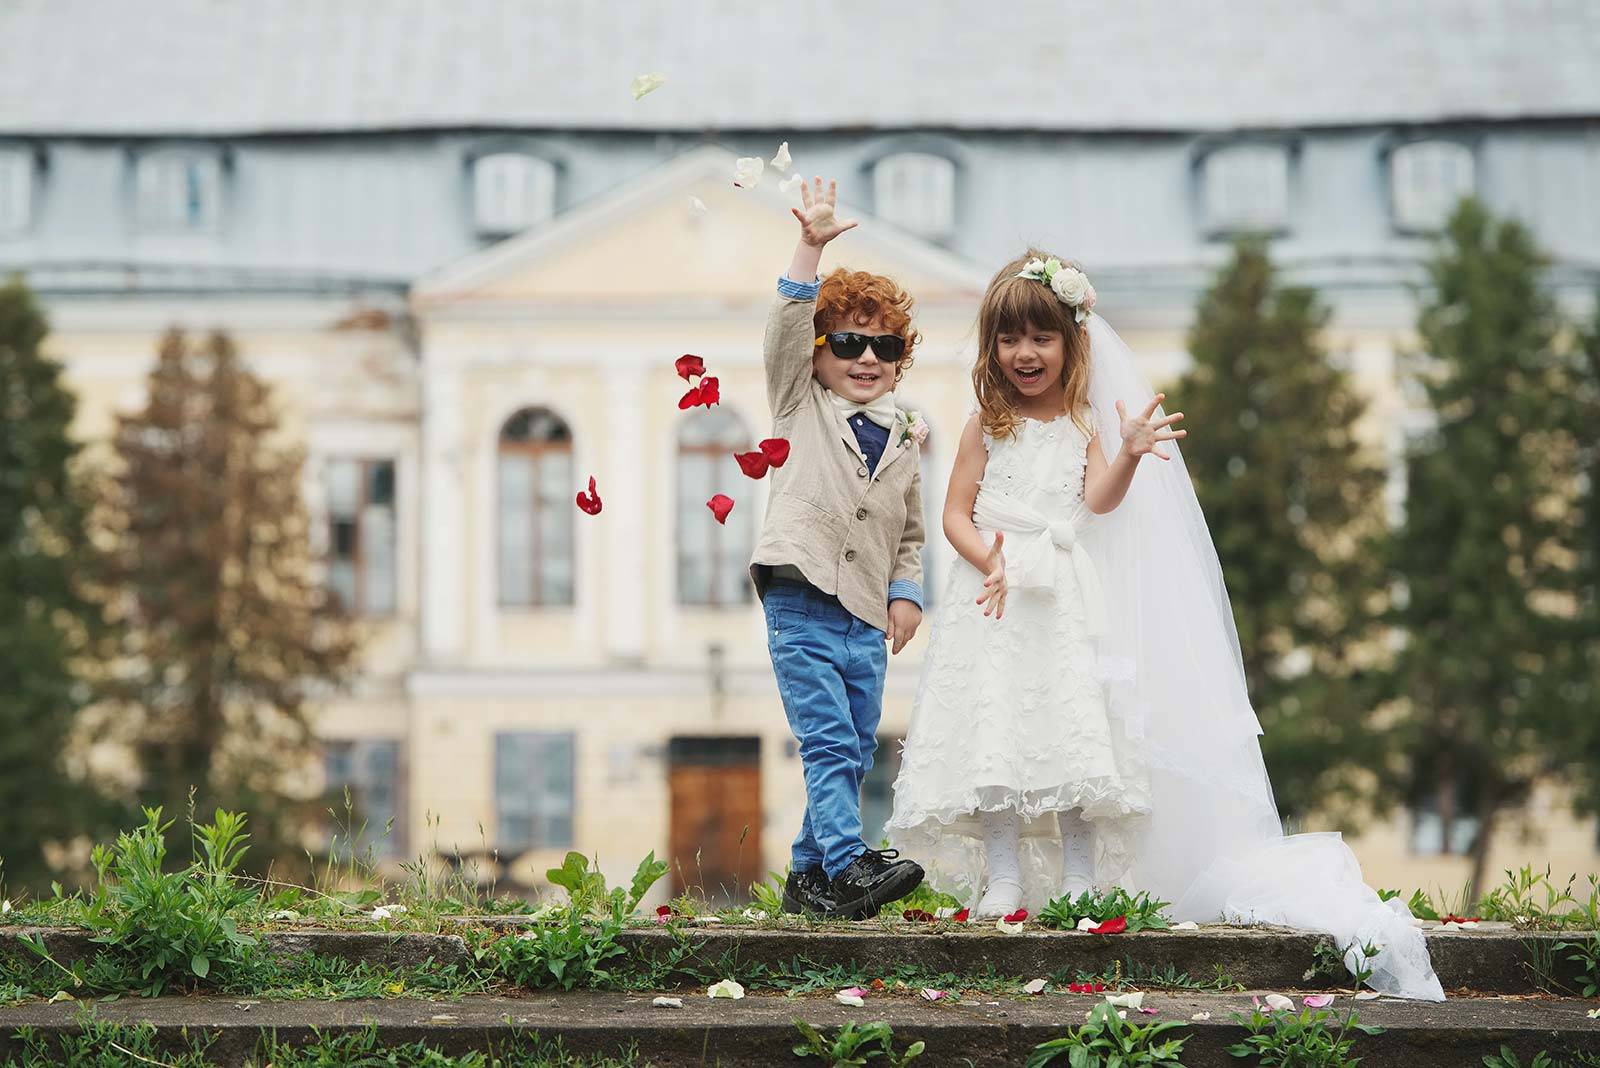 Wedding Entertainment For Kids: 15 Ideas to Keep the Little Ones Occupied